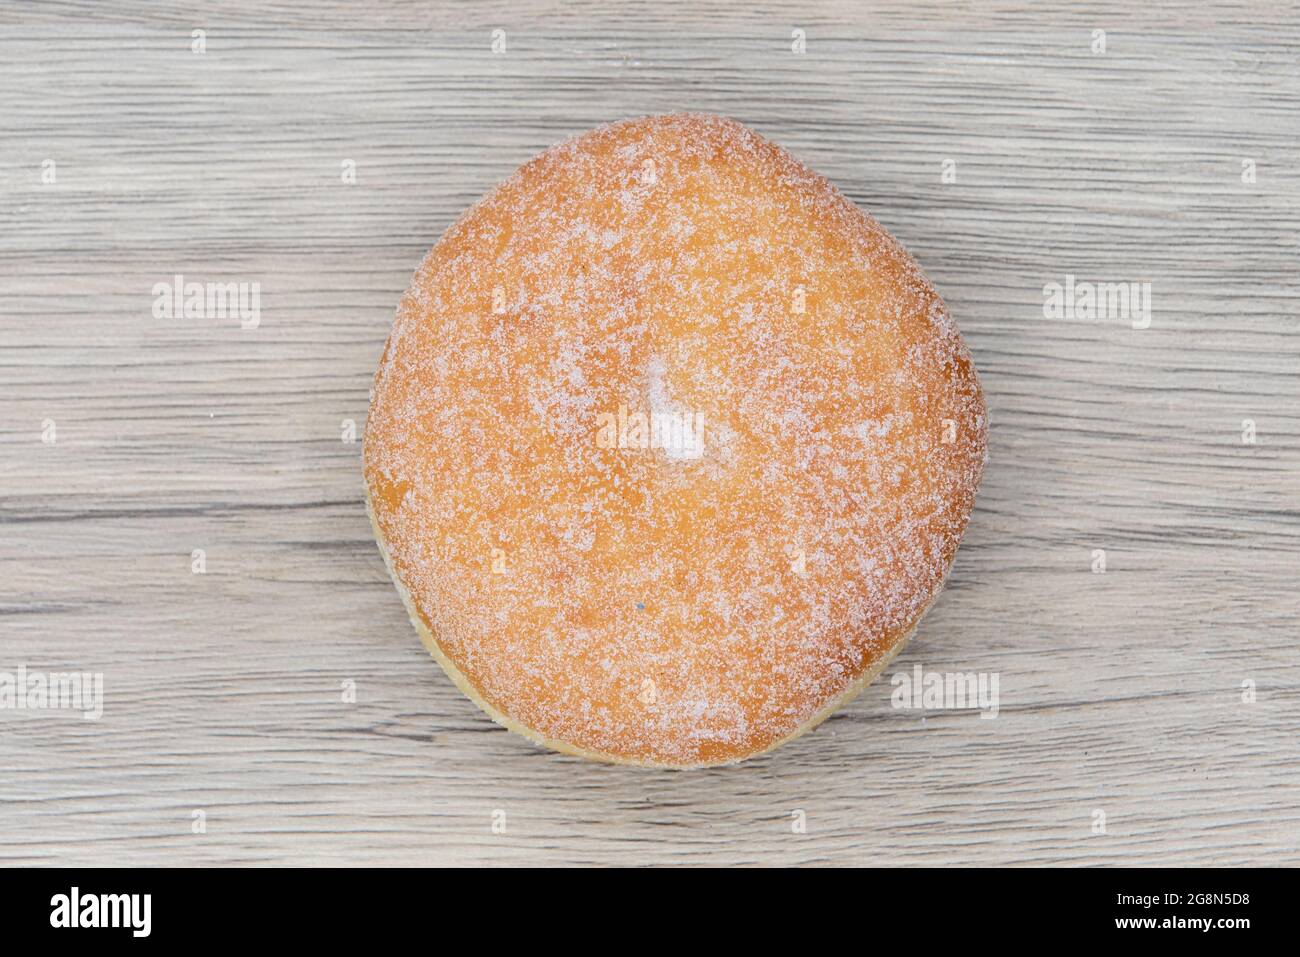 Overhead view of sugar raised round donut is textured with sugar coating for a sweet treat delight. Stock Photo